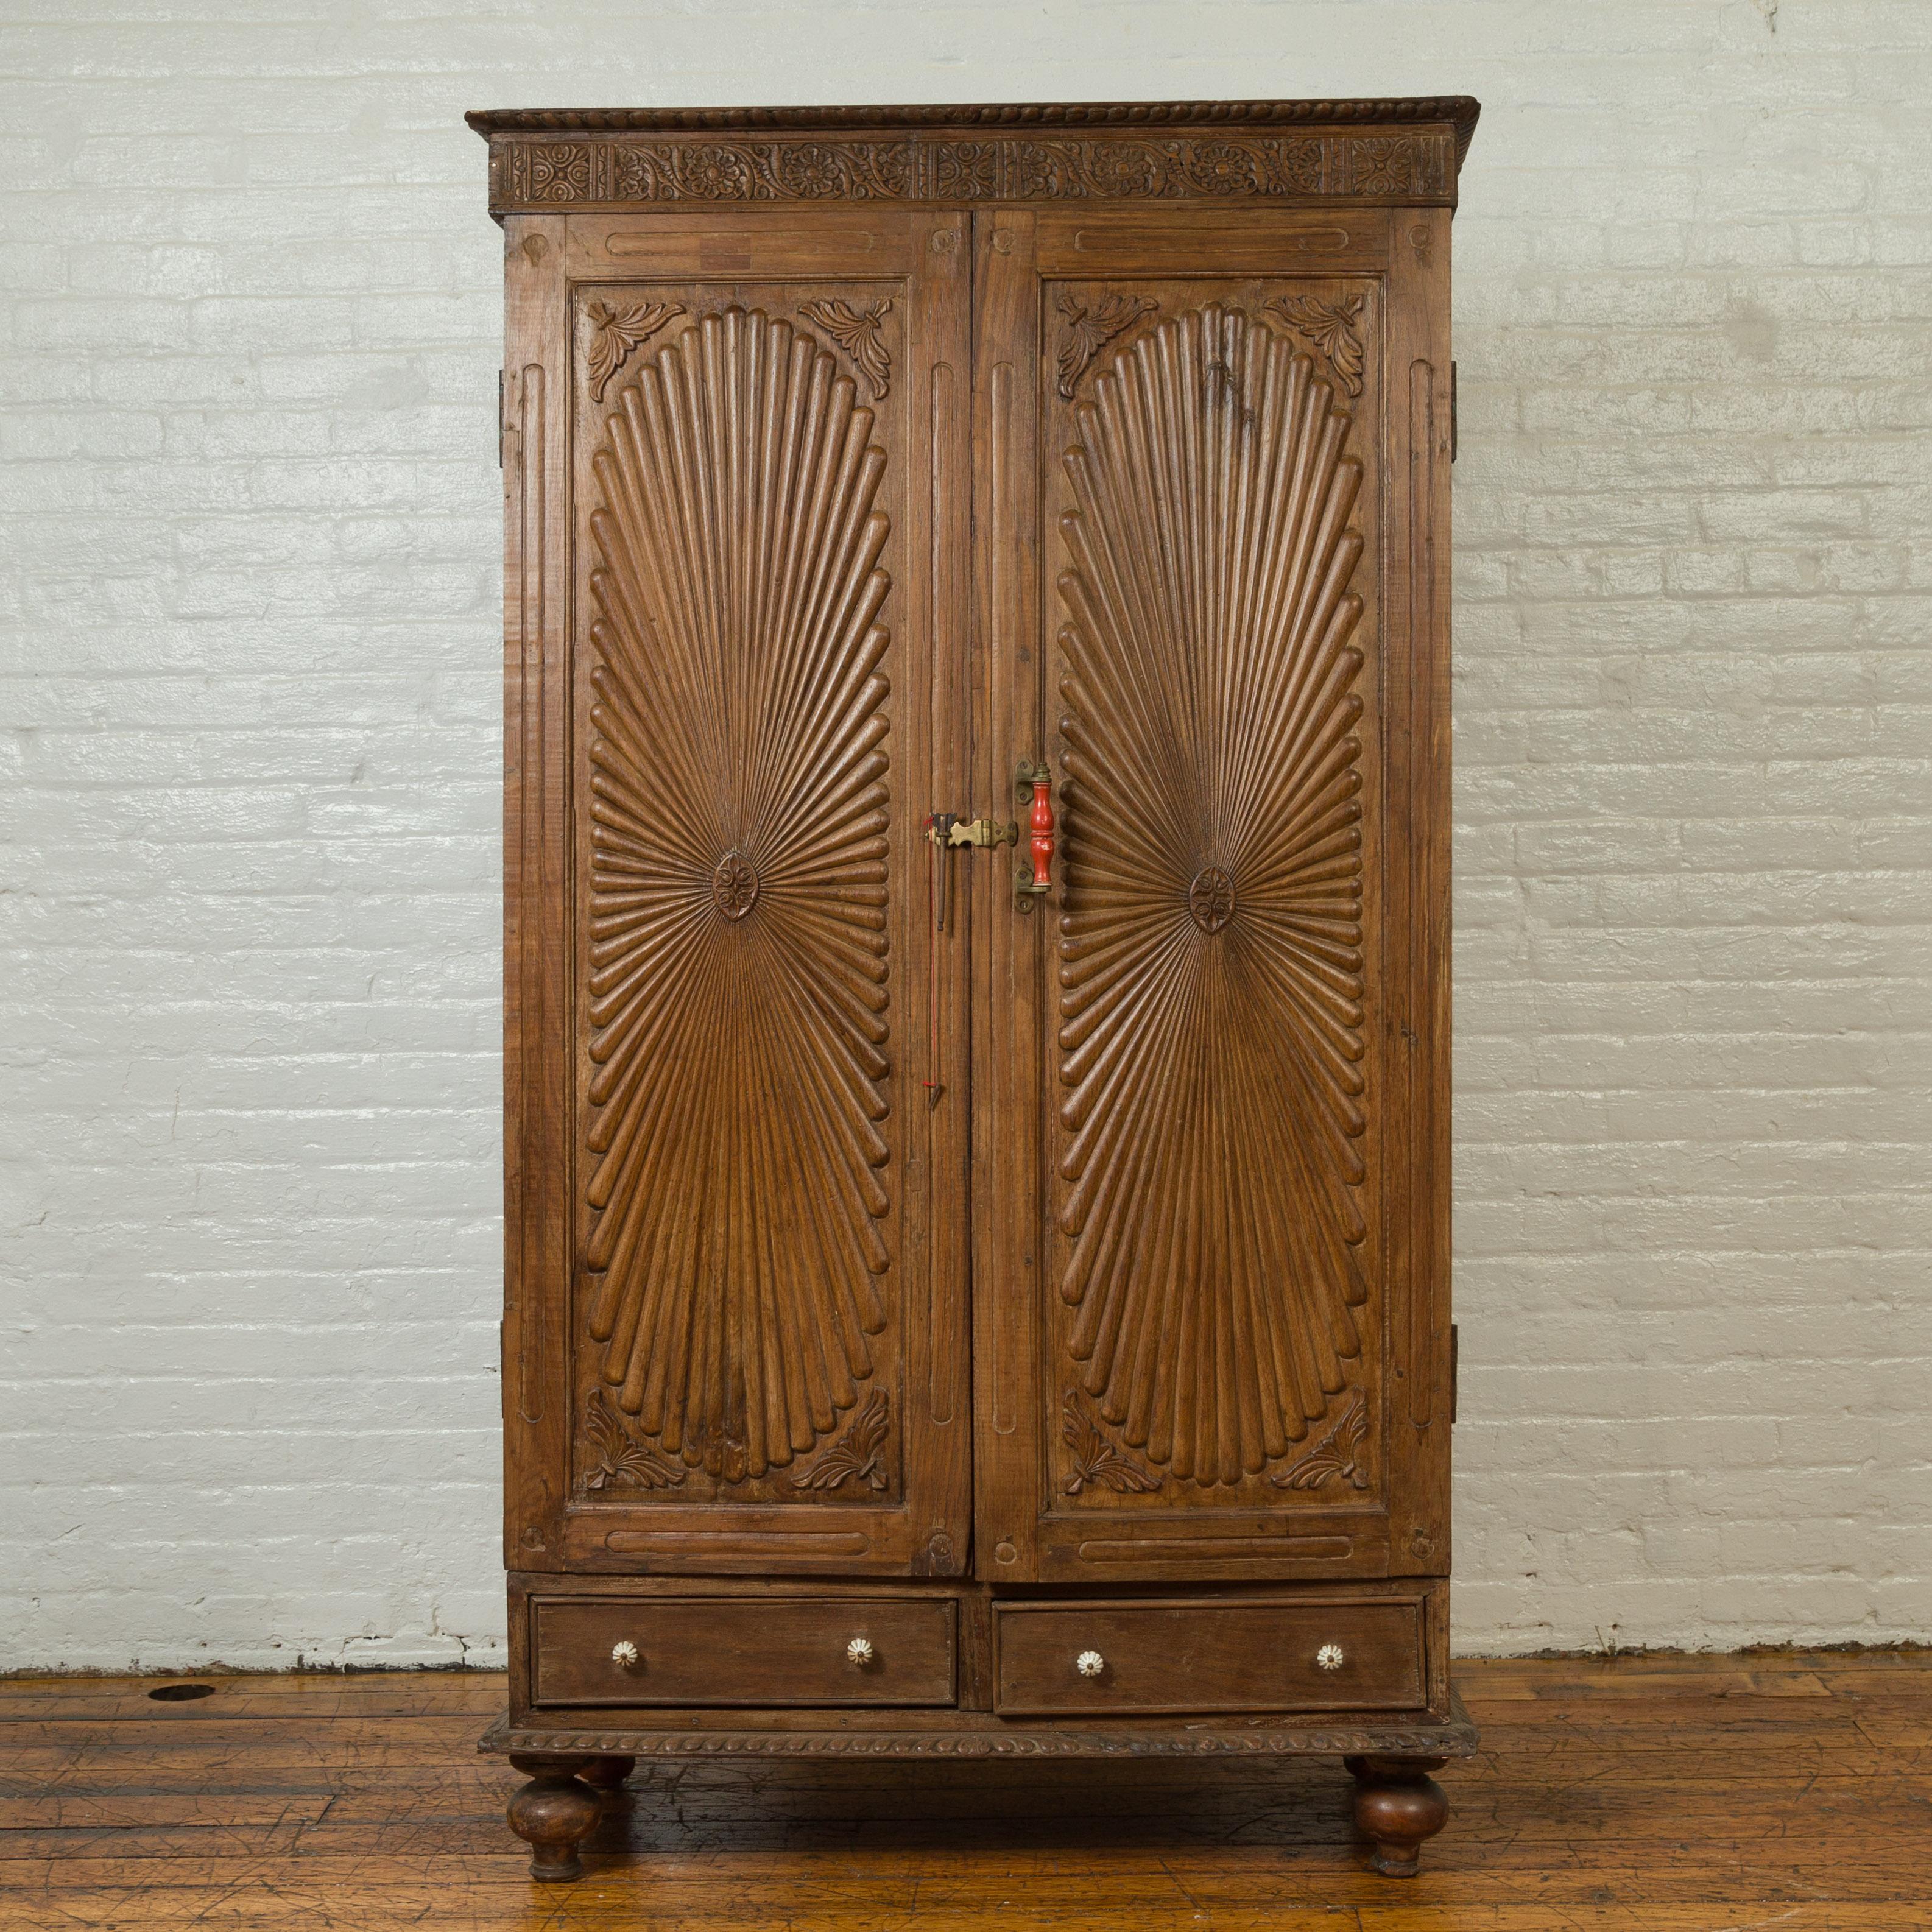 An antique Indian wooden cabinet from the 19th century, with sunburst patterns and floral motifs. Born in India during the 19th century, this tall cabinet features a carved cornice adorned with floral motifs, sitting above two doors presenting large